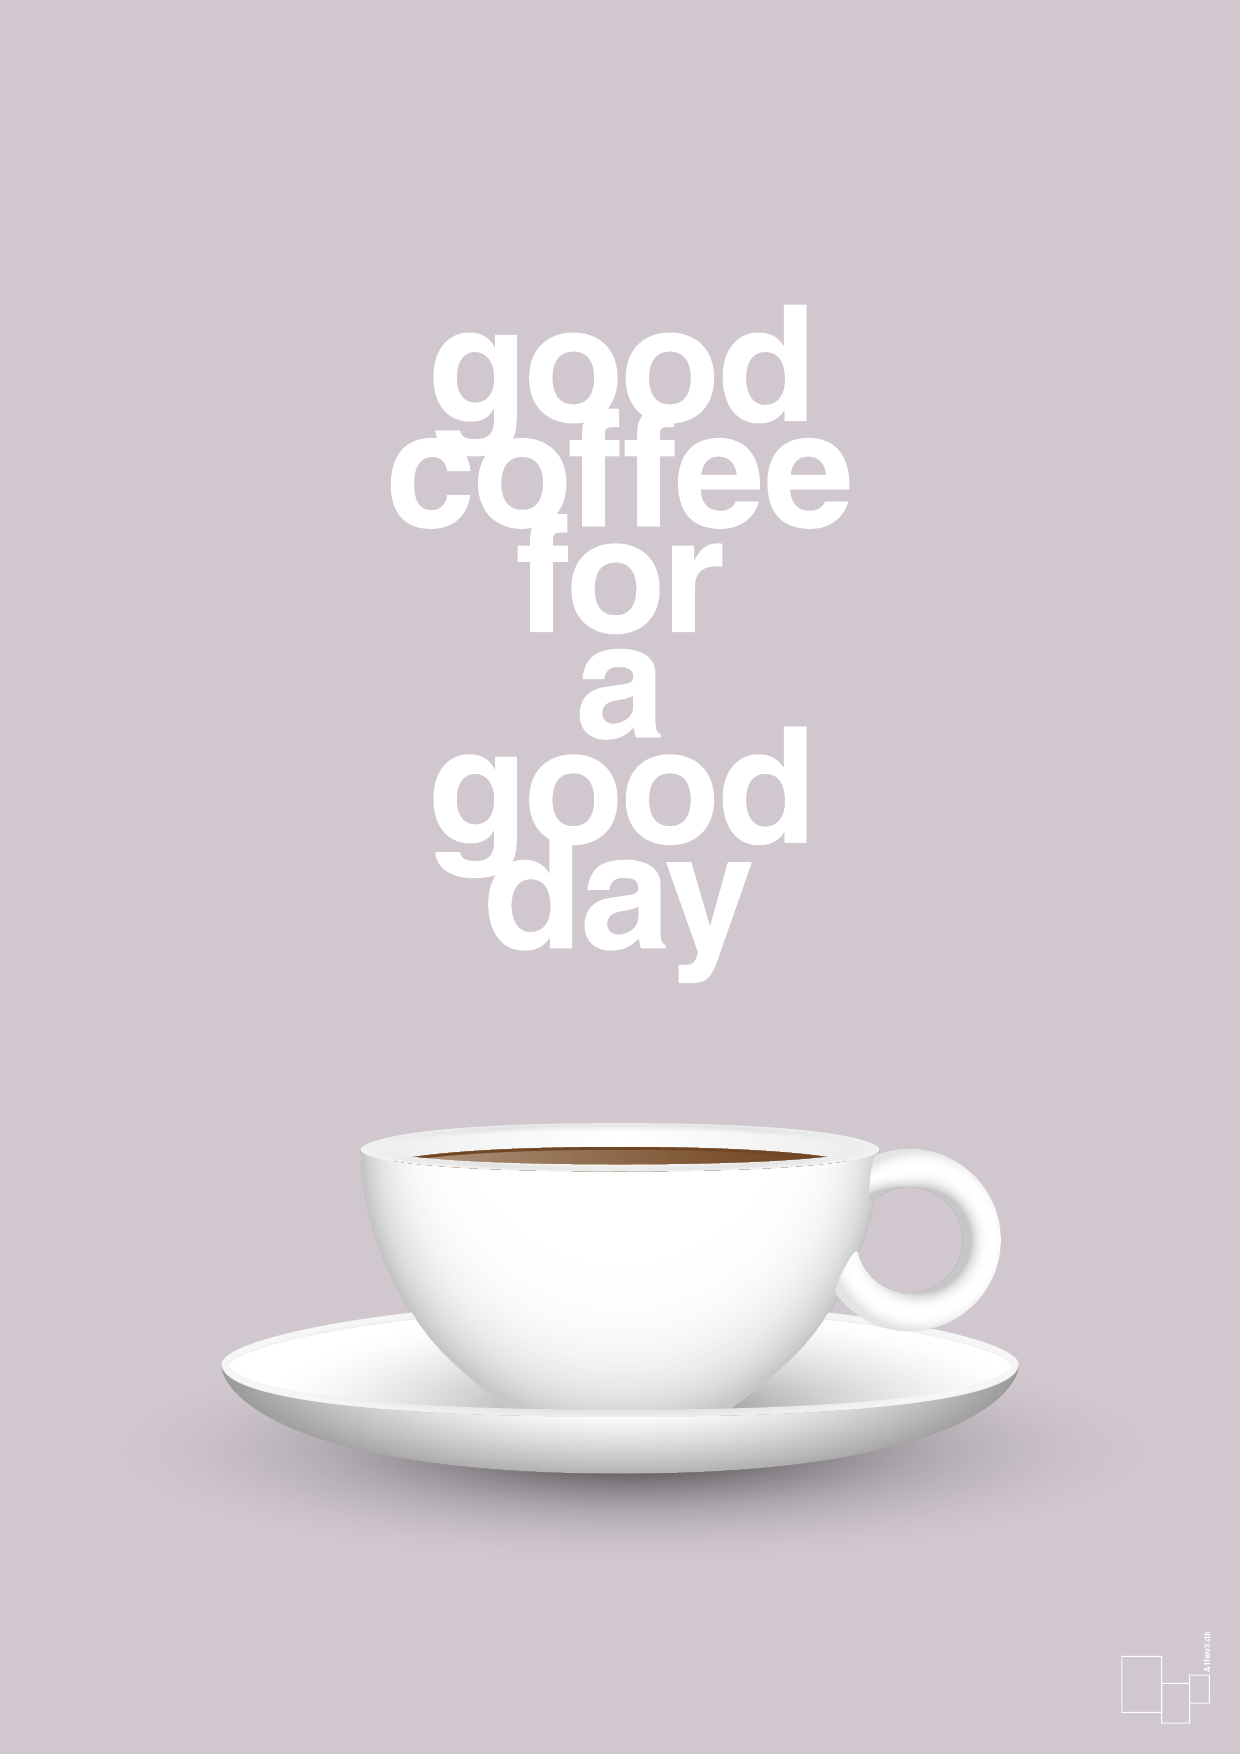 good coffee for a good day - Plakat med Mad & Drikke i Dusty Lilac